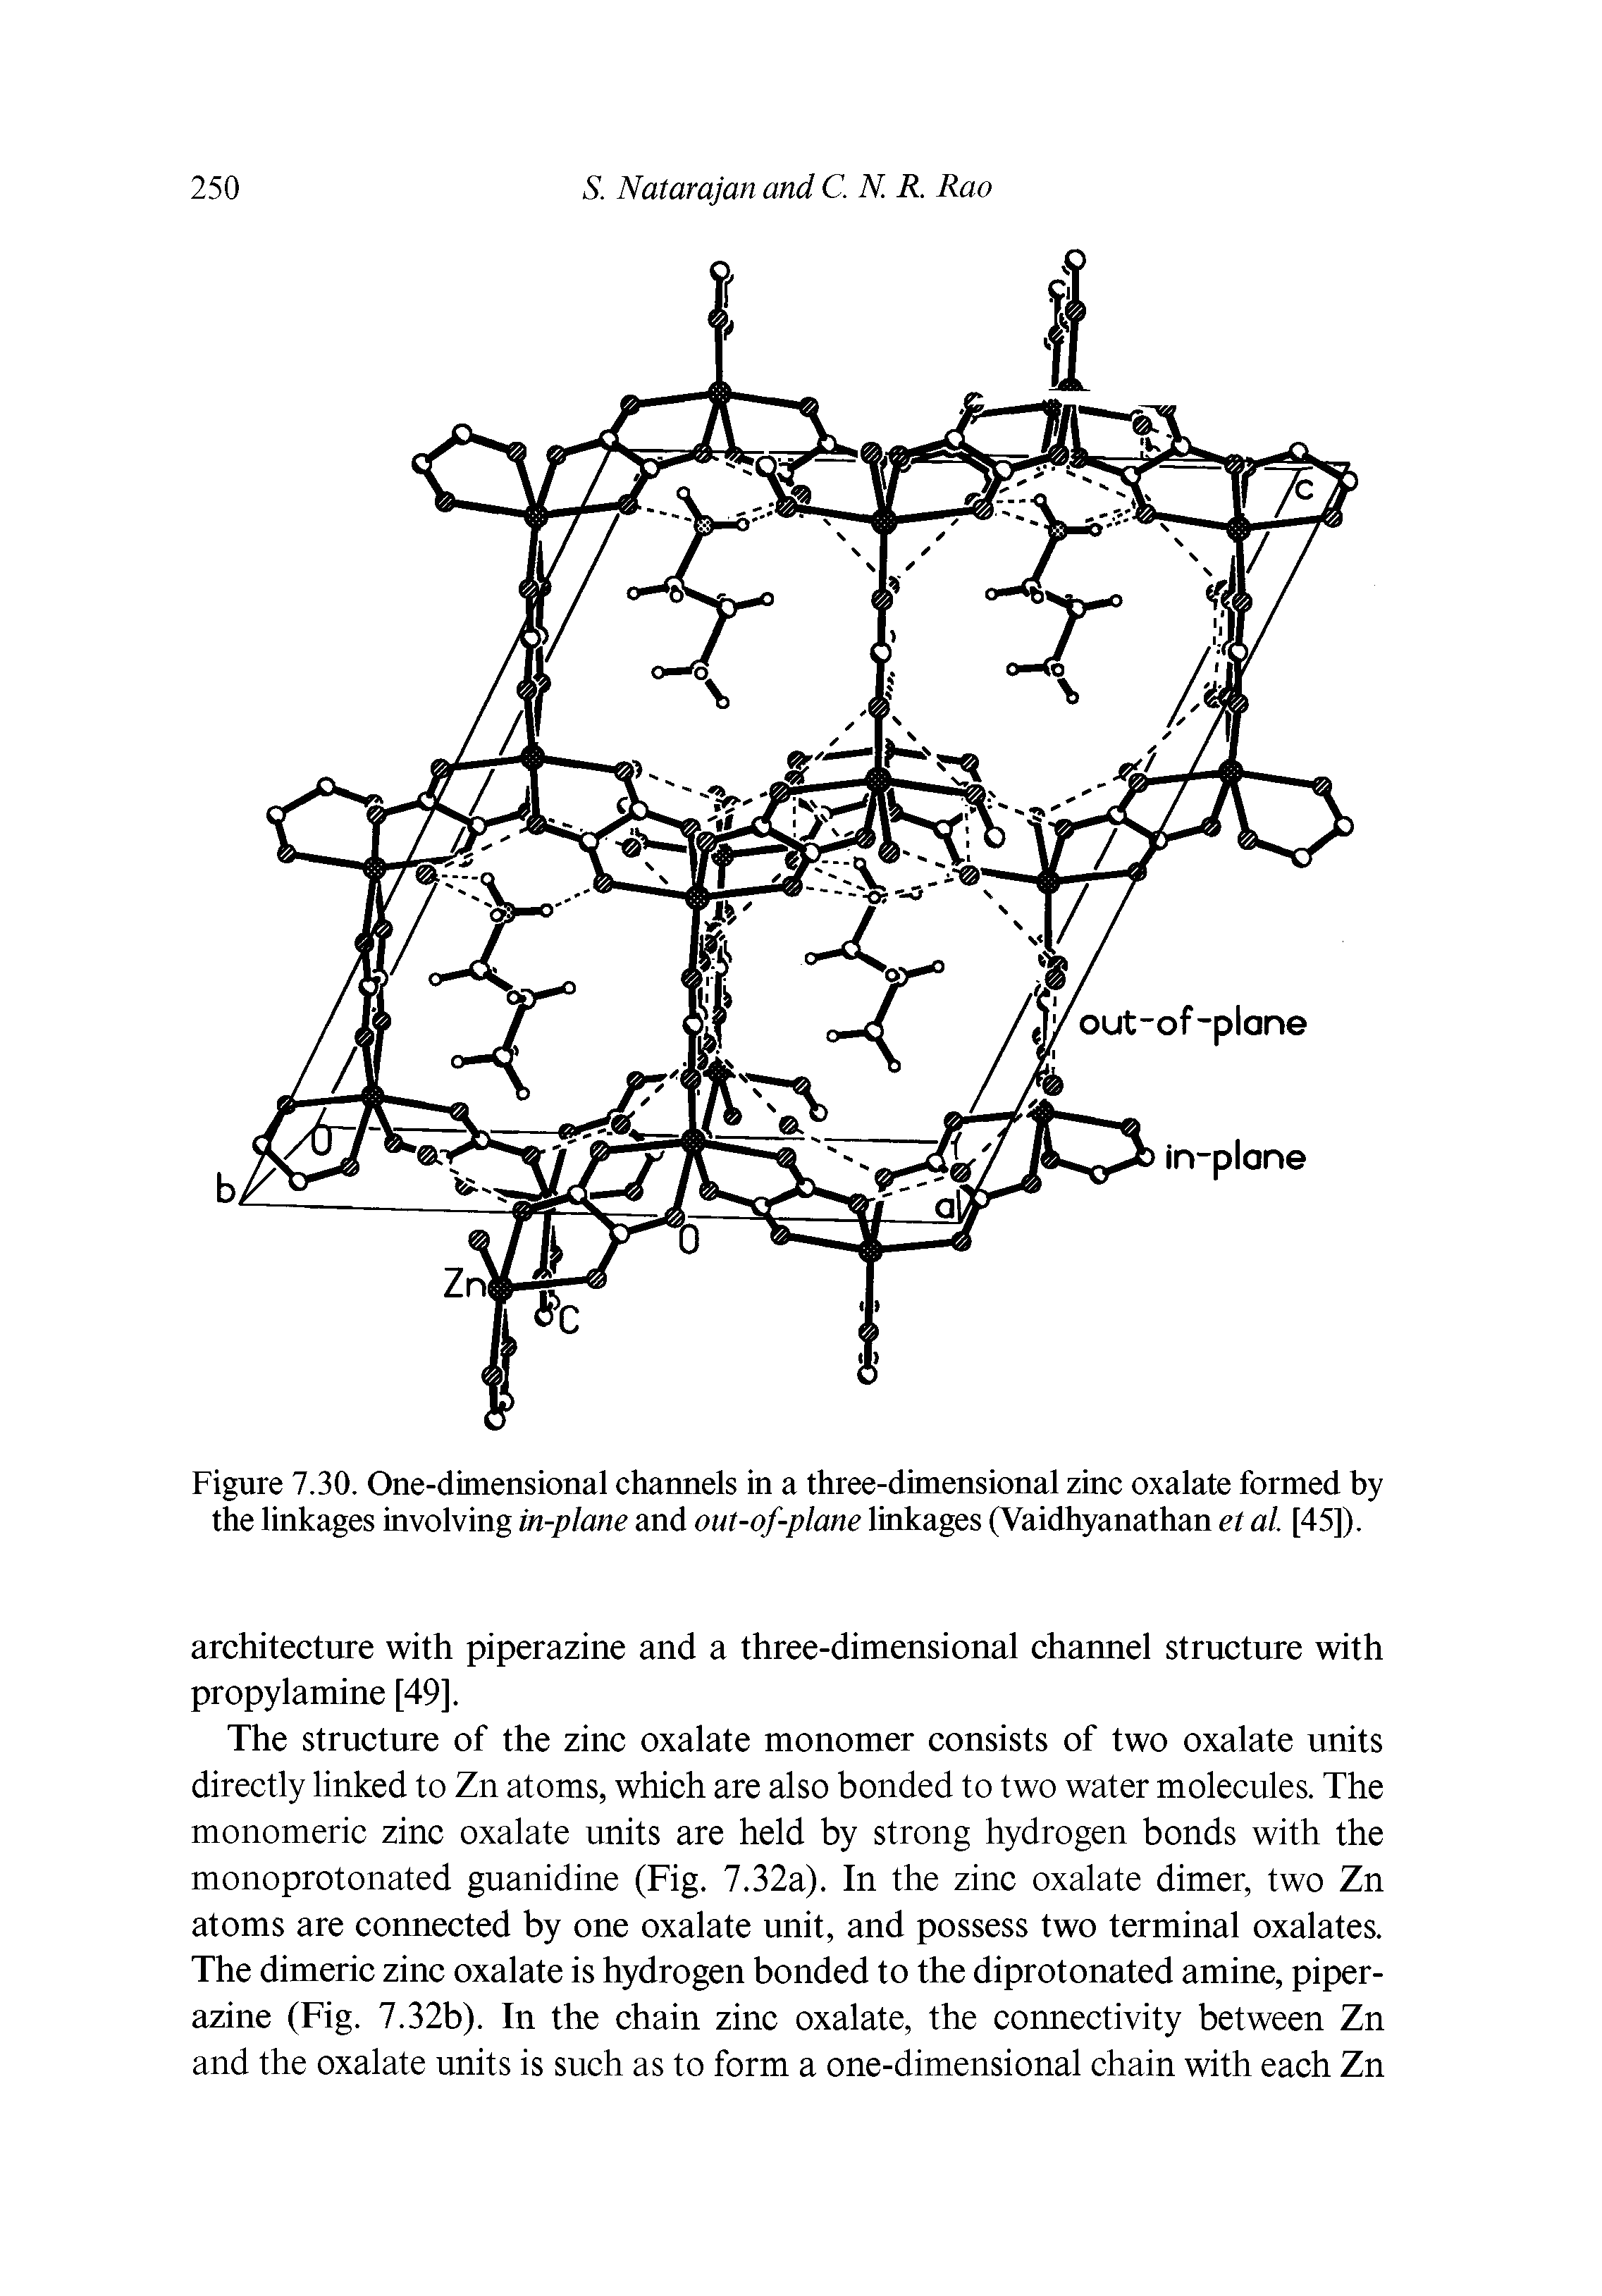 Figure 7.30. One-dimensional channels in a three-dimensional zinc oxalate formed by the linkages involving in-plane and out-of-plane linkages (Vaidhyanathan el al. [45]).